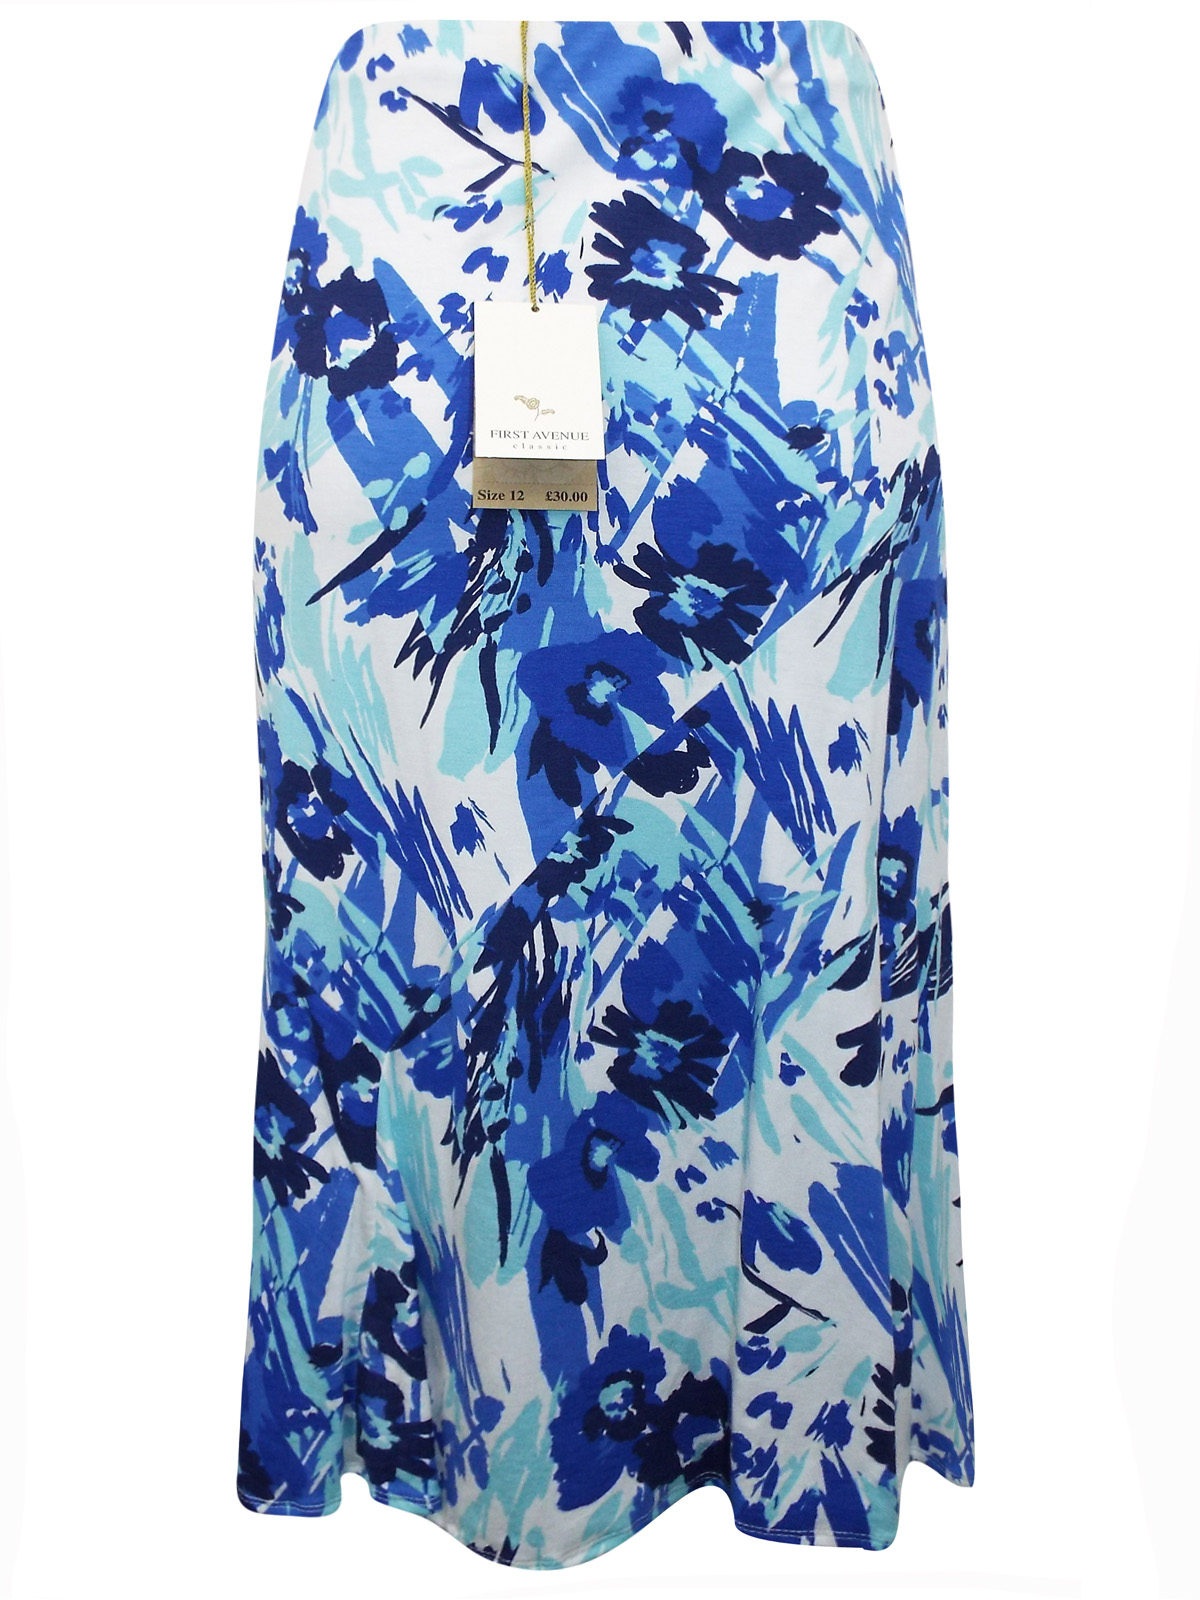 First Avenue BLUE Pull On Floral Print Panelled Midi Skirt - Size 12 to 14